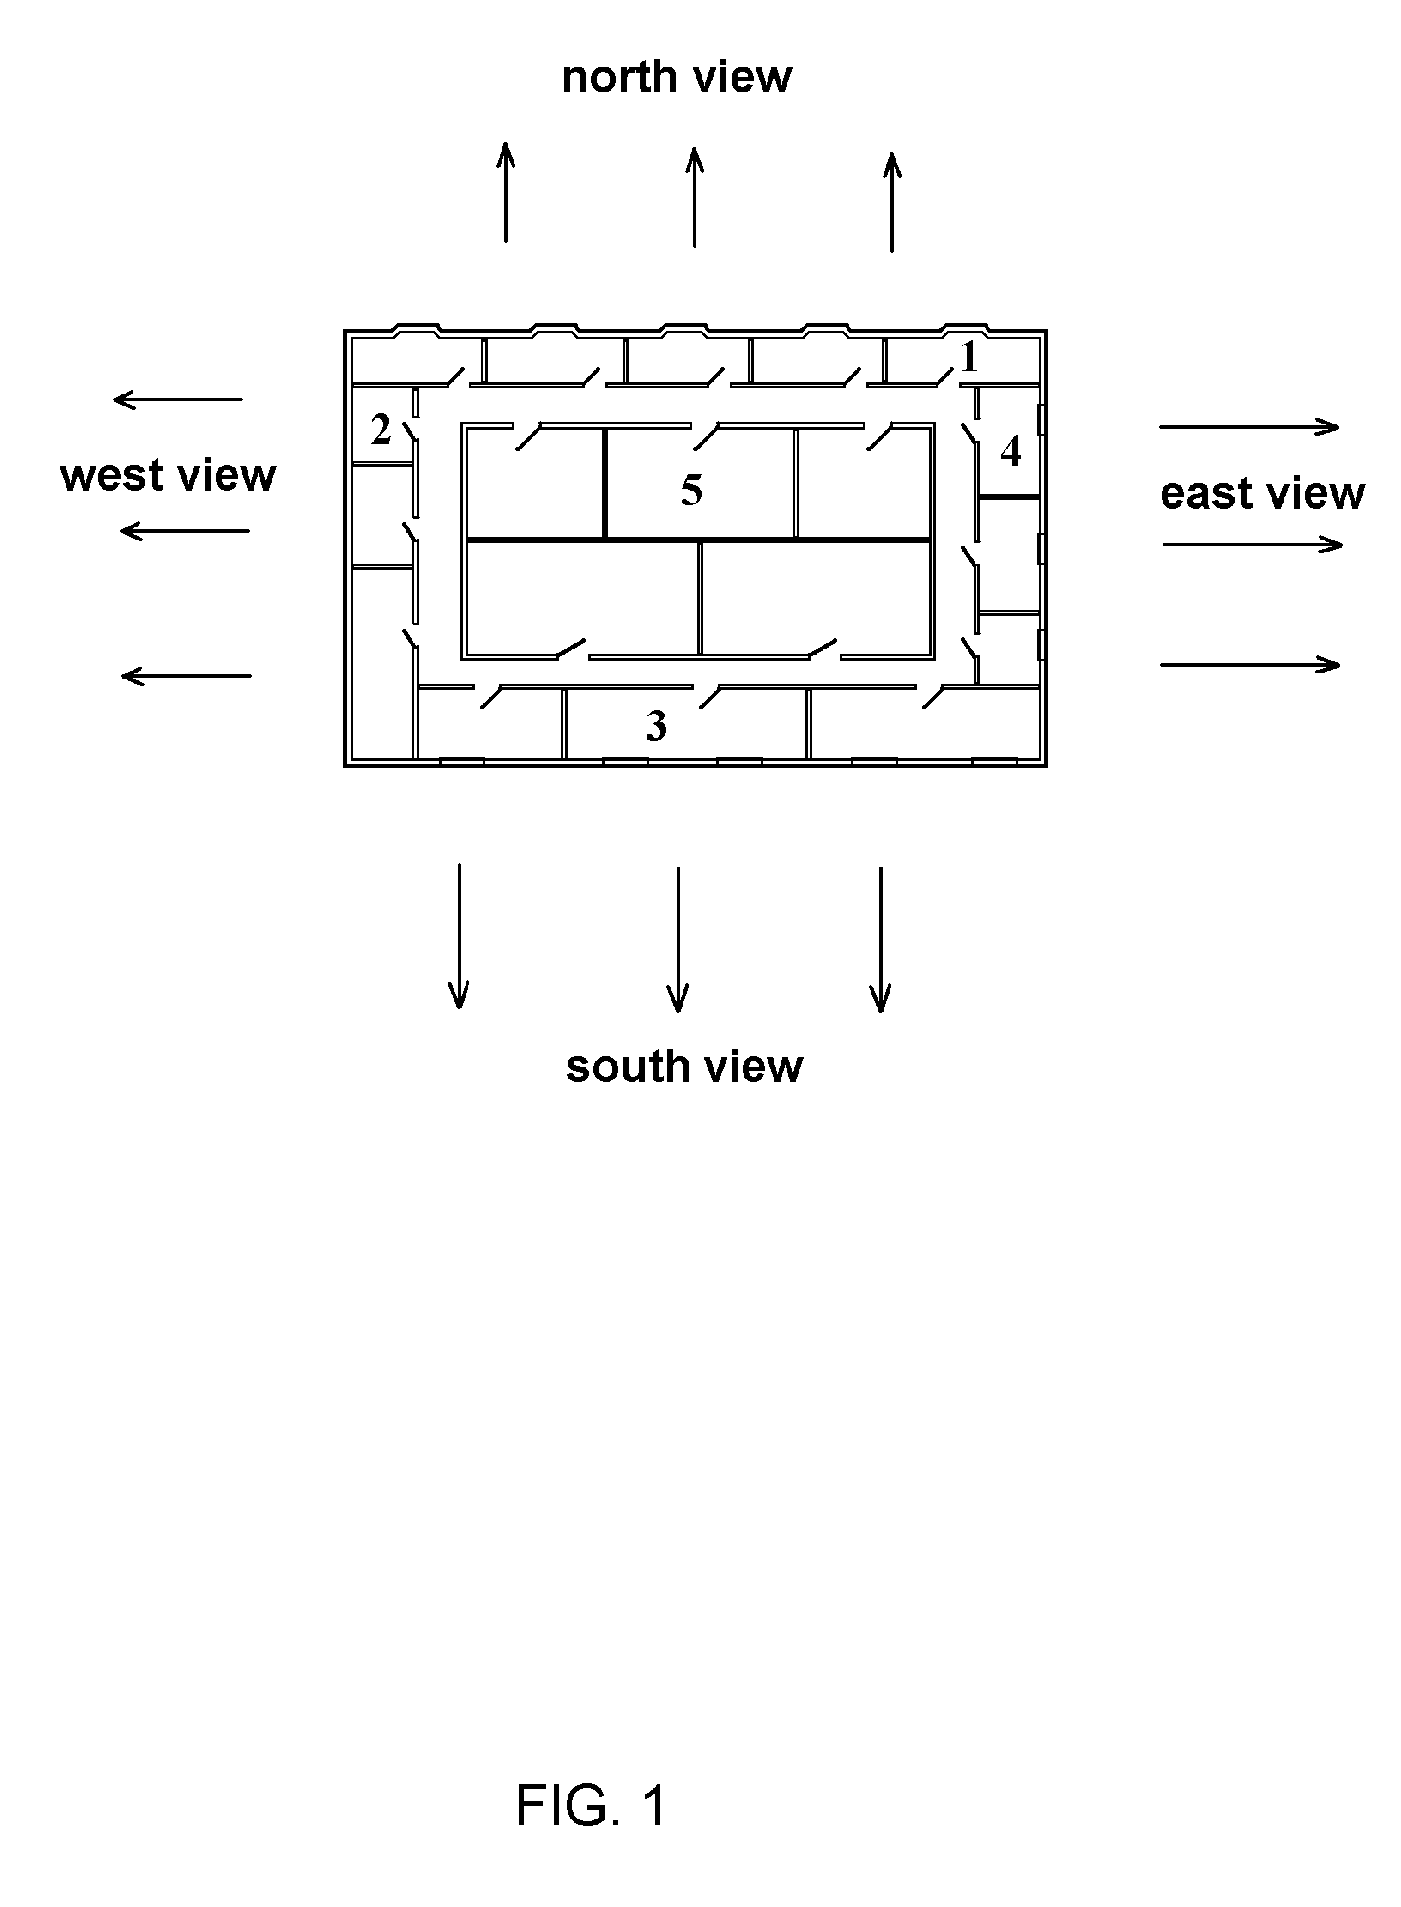 Method and apparatus to simulate an outdoor window for panorama viewing from a room